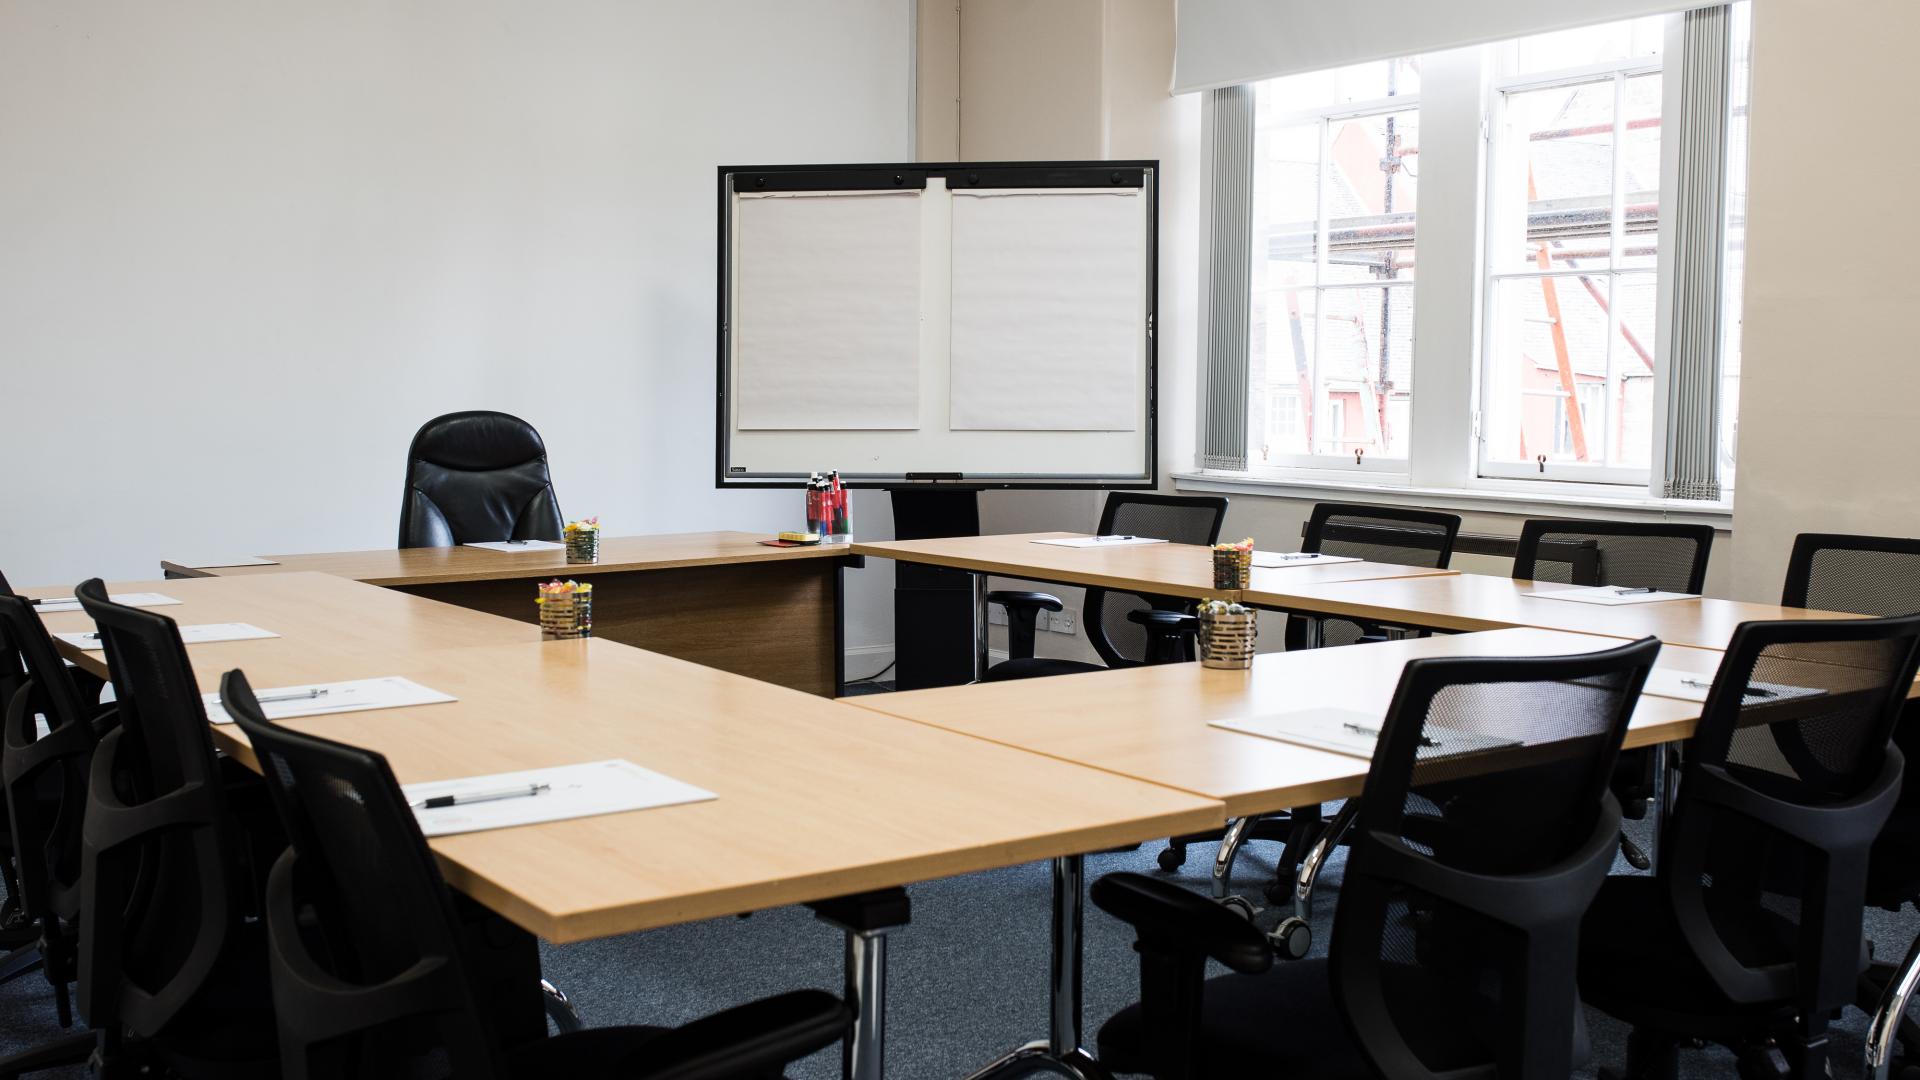 Meeting Rooms for Hire in Edinburgh